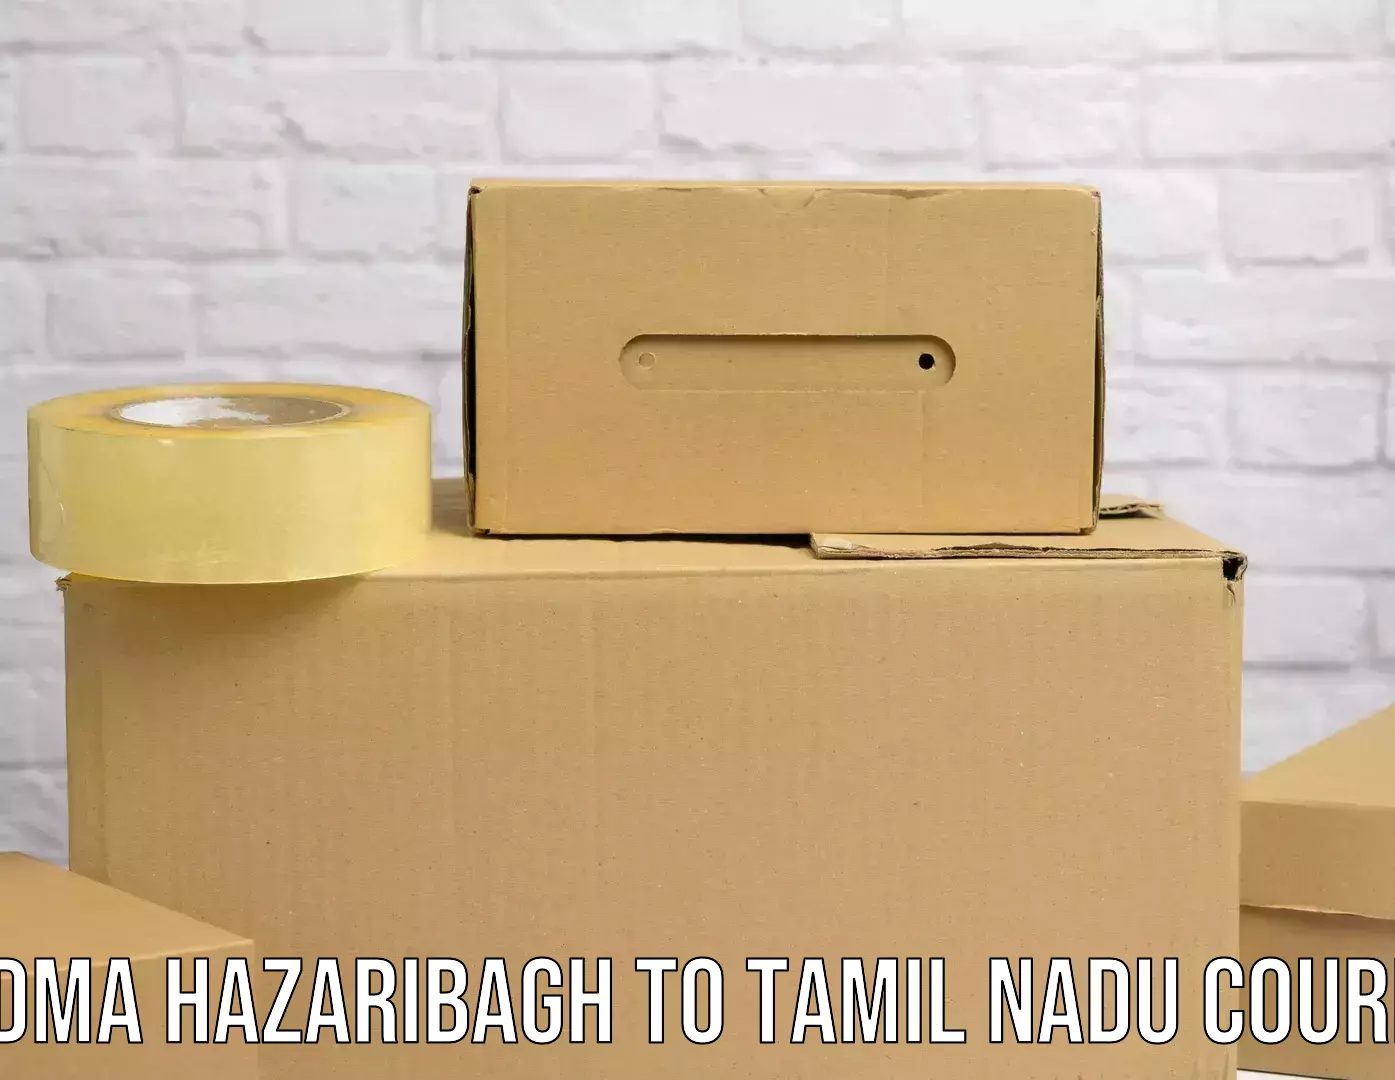 Express delivery network Padma Hazaribagh to Madurai